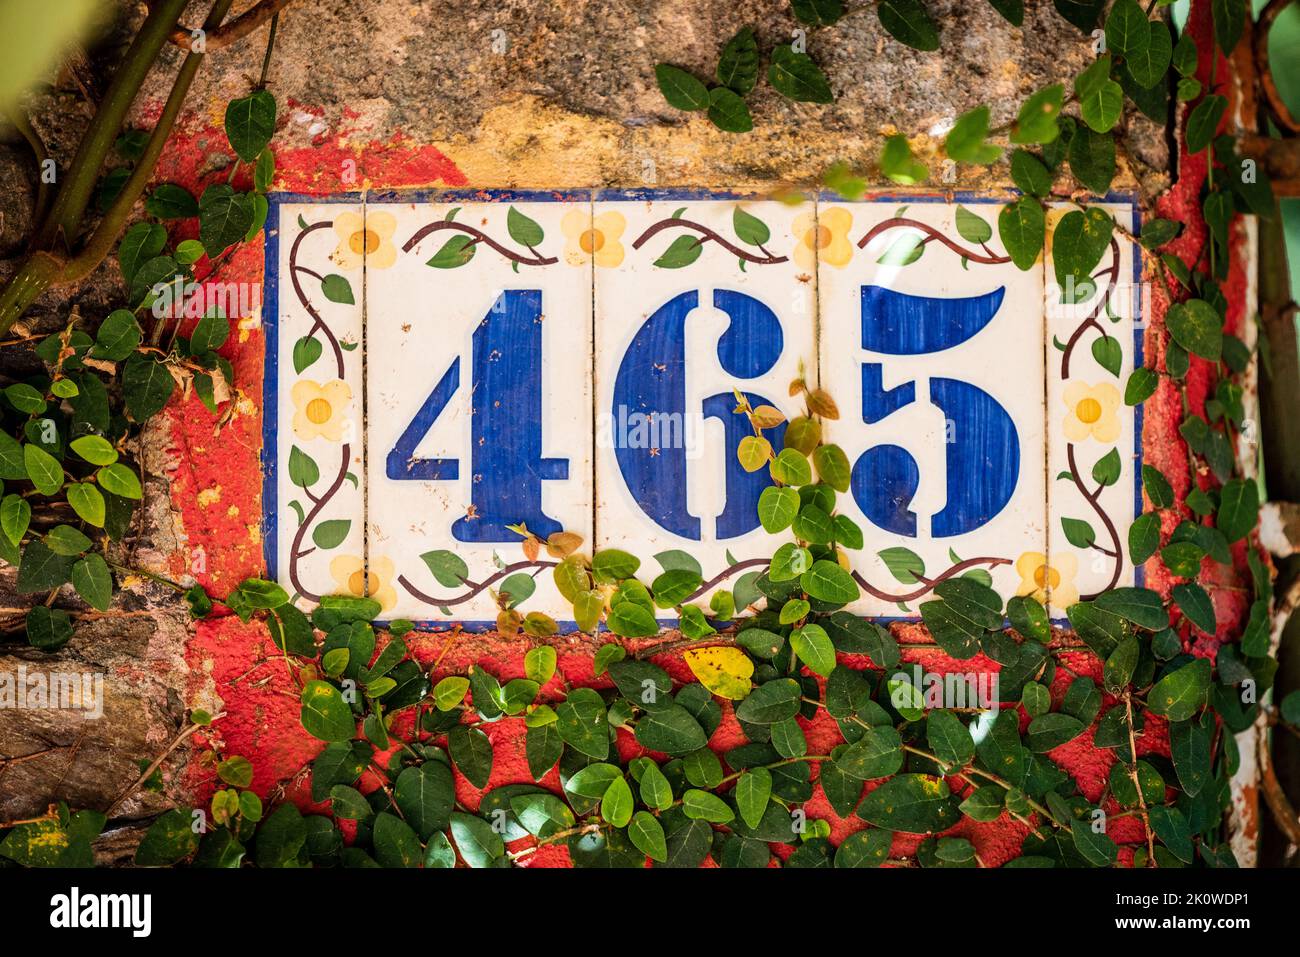 Ornate Spanish-style house numbers on ceramic tile covered with vines in Belo Horizonte, Minas Gerais, Brazil. Stock Photo